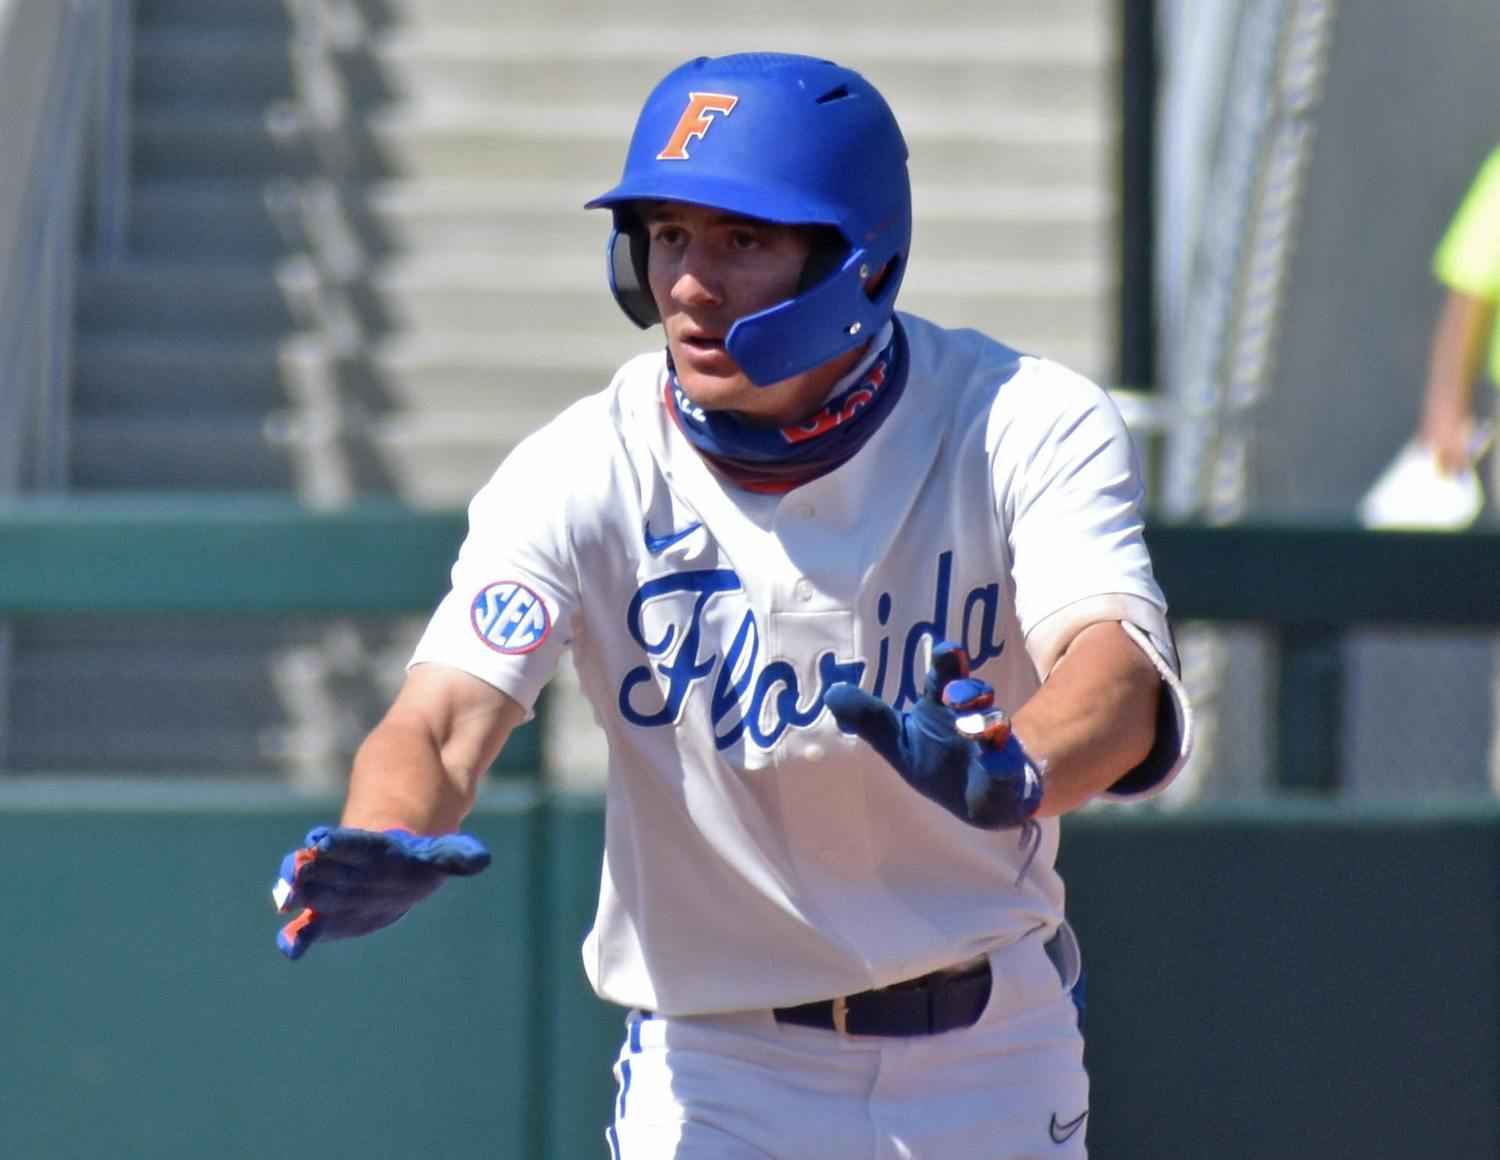 After South Carolina swept UF on the road last weekend, No. 15 Florida bounced back with a 4-1 win over No. 3 Ole Miss on a chilly Thursday night at Florida Ballpark. Photo from UF-Jacksonville game March 14.